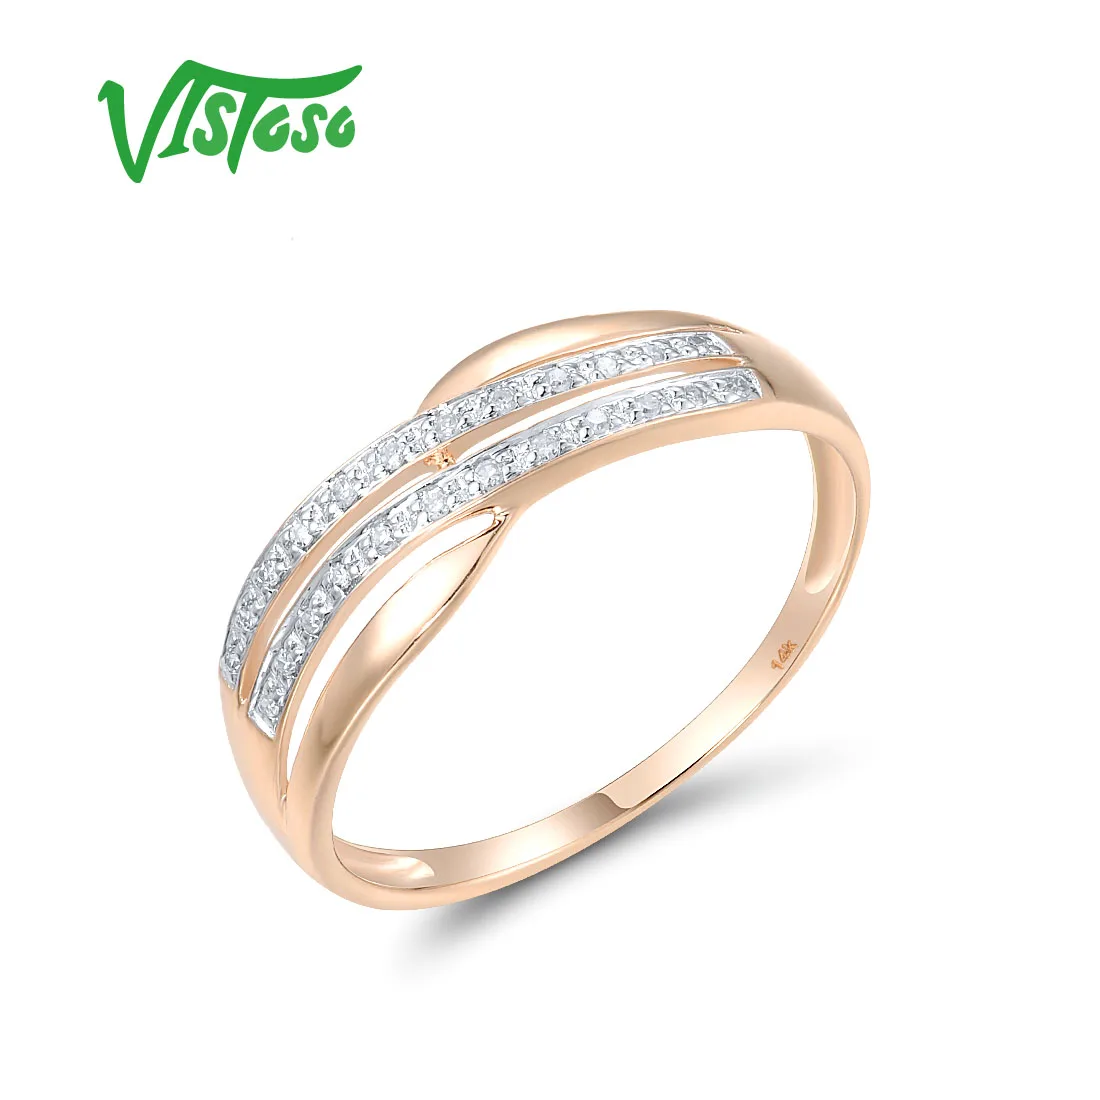 

VISTOSO Genuine 14K 585 Rose Gold Rings For Lady Sparkling Diamond Eternal Wedding Engagement Gifts Simple Delicate Fine Jewelry